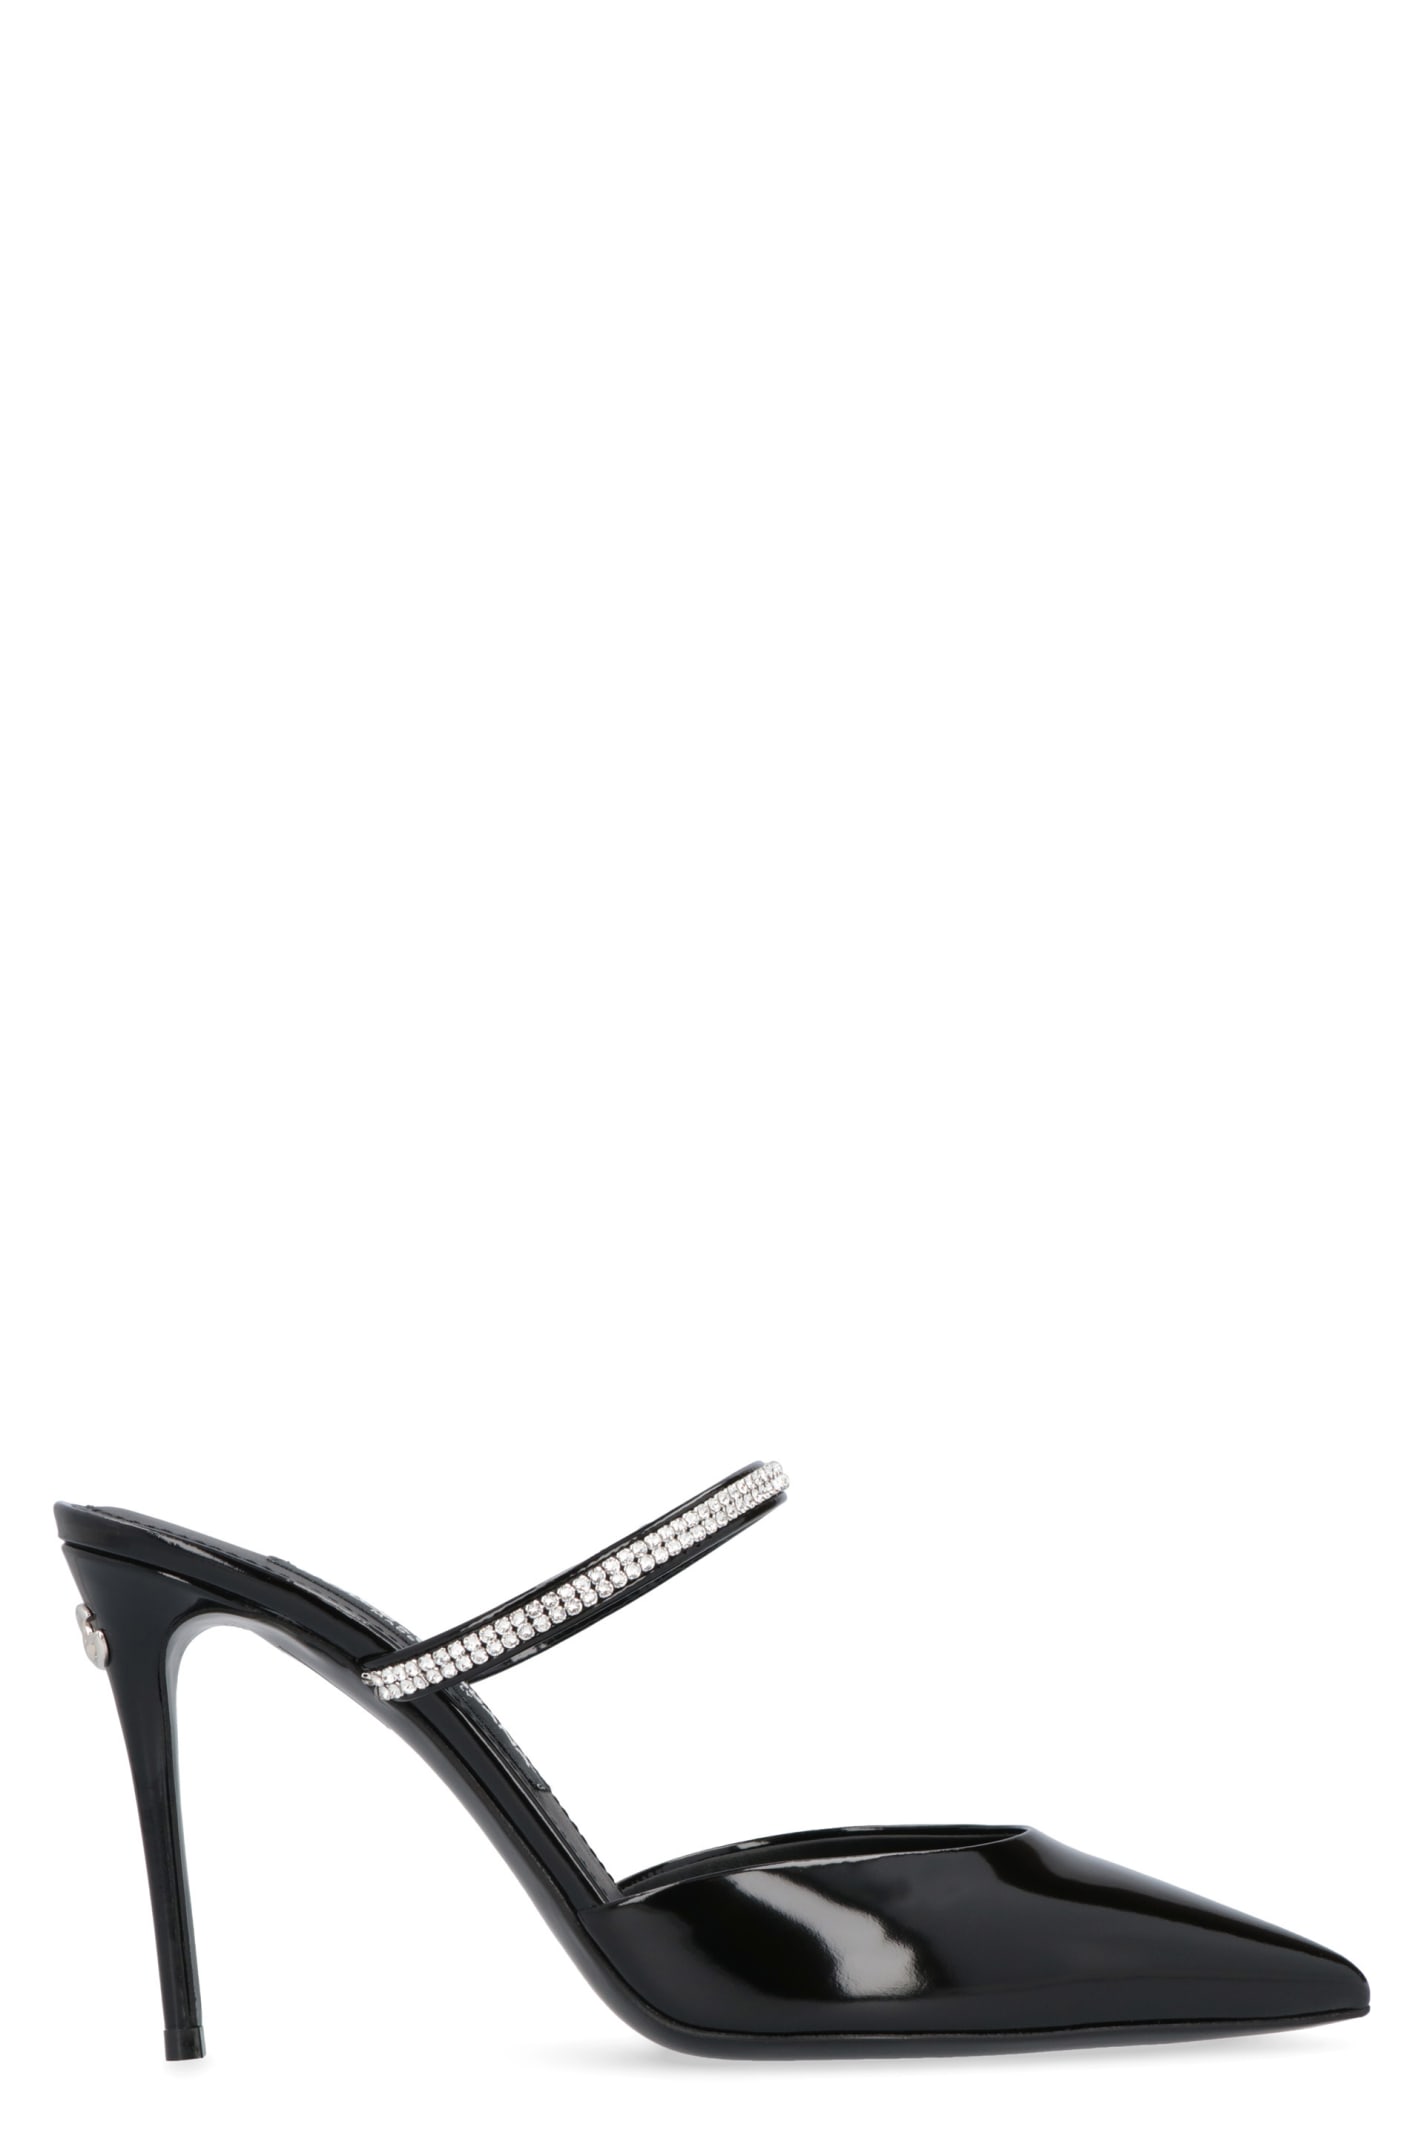 Dolce & Gabbana Leather Pointy-toe Mules